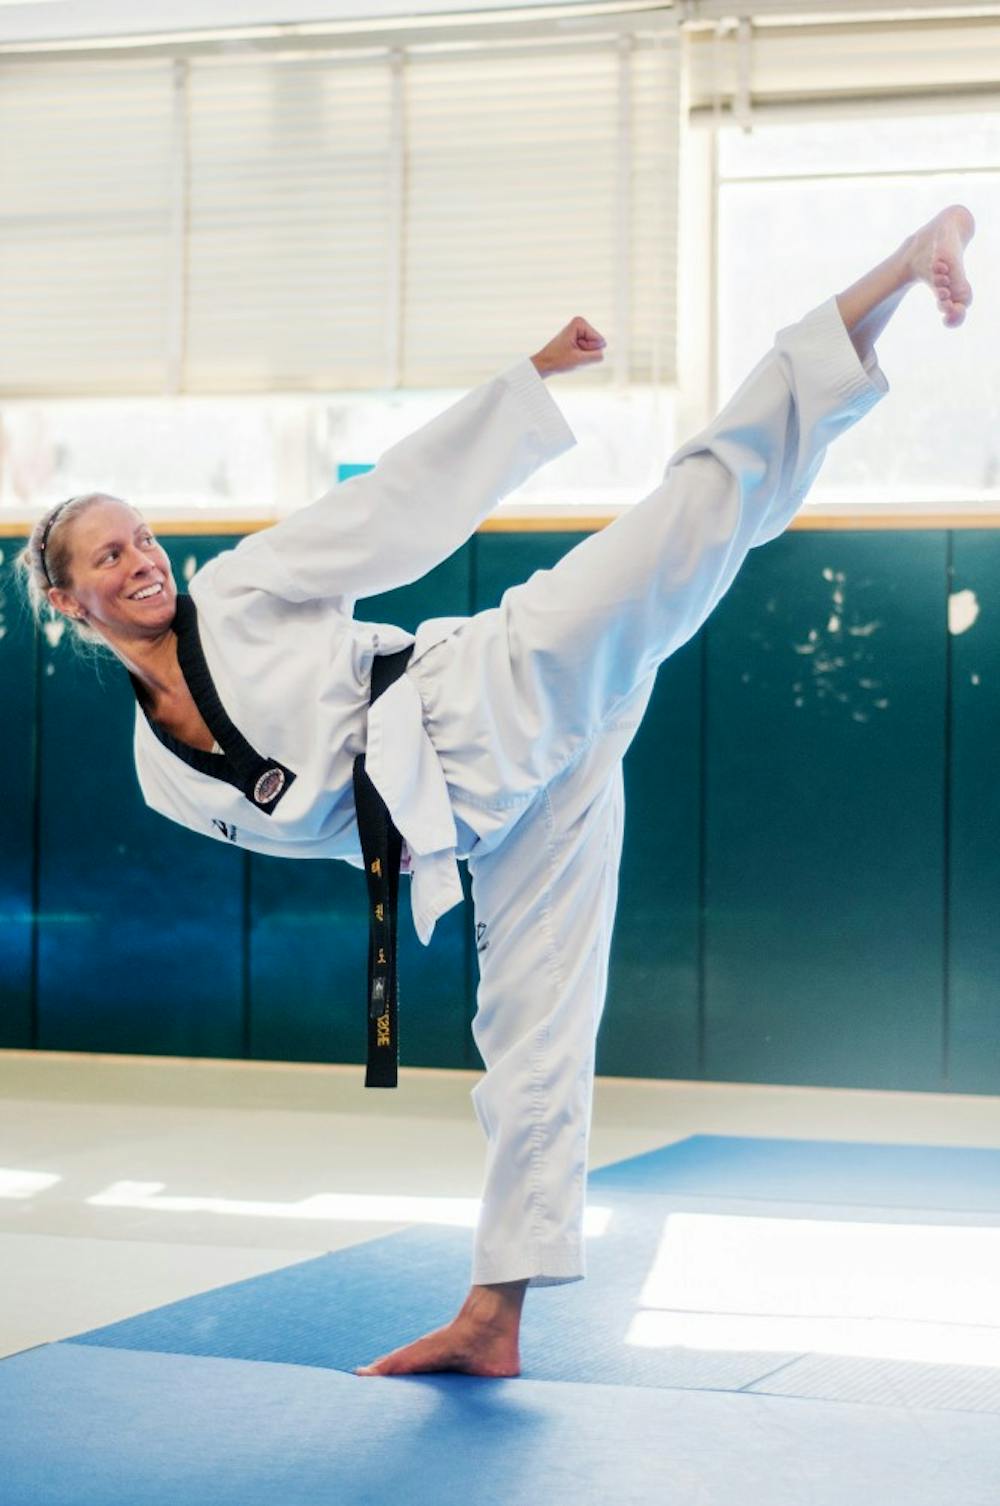 Kimberly Fritzsche, of Owosso, Mich. practices a special technique of Taekwondo at IM West with the MSU Taekwondo Club.  The club is part of both USA Taekwondo and the National Collegiate Taekwondo Association and is training for a national championship. Adam Toolin/The State News